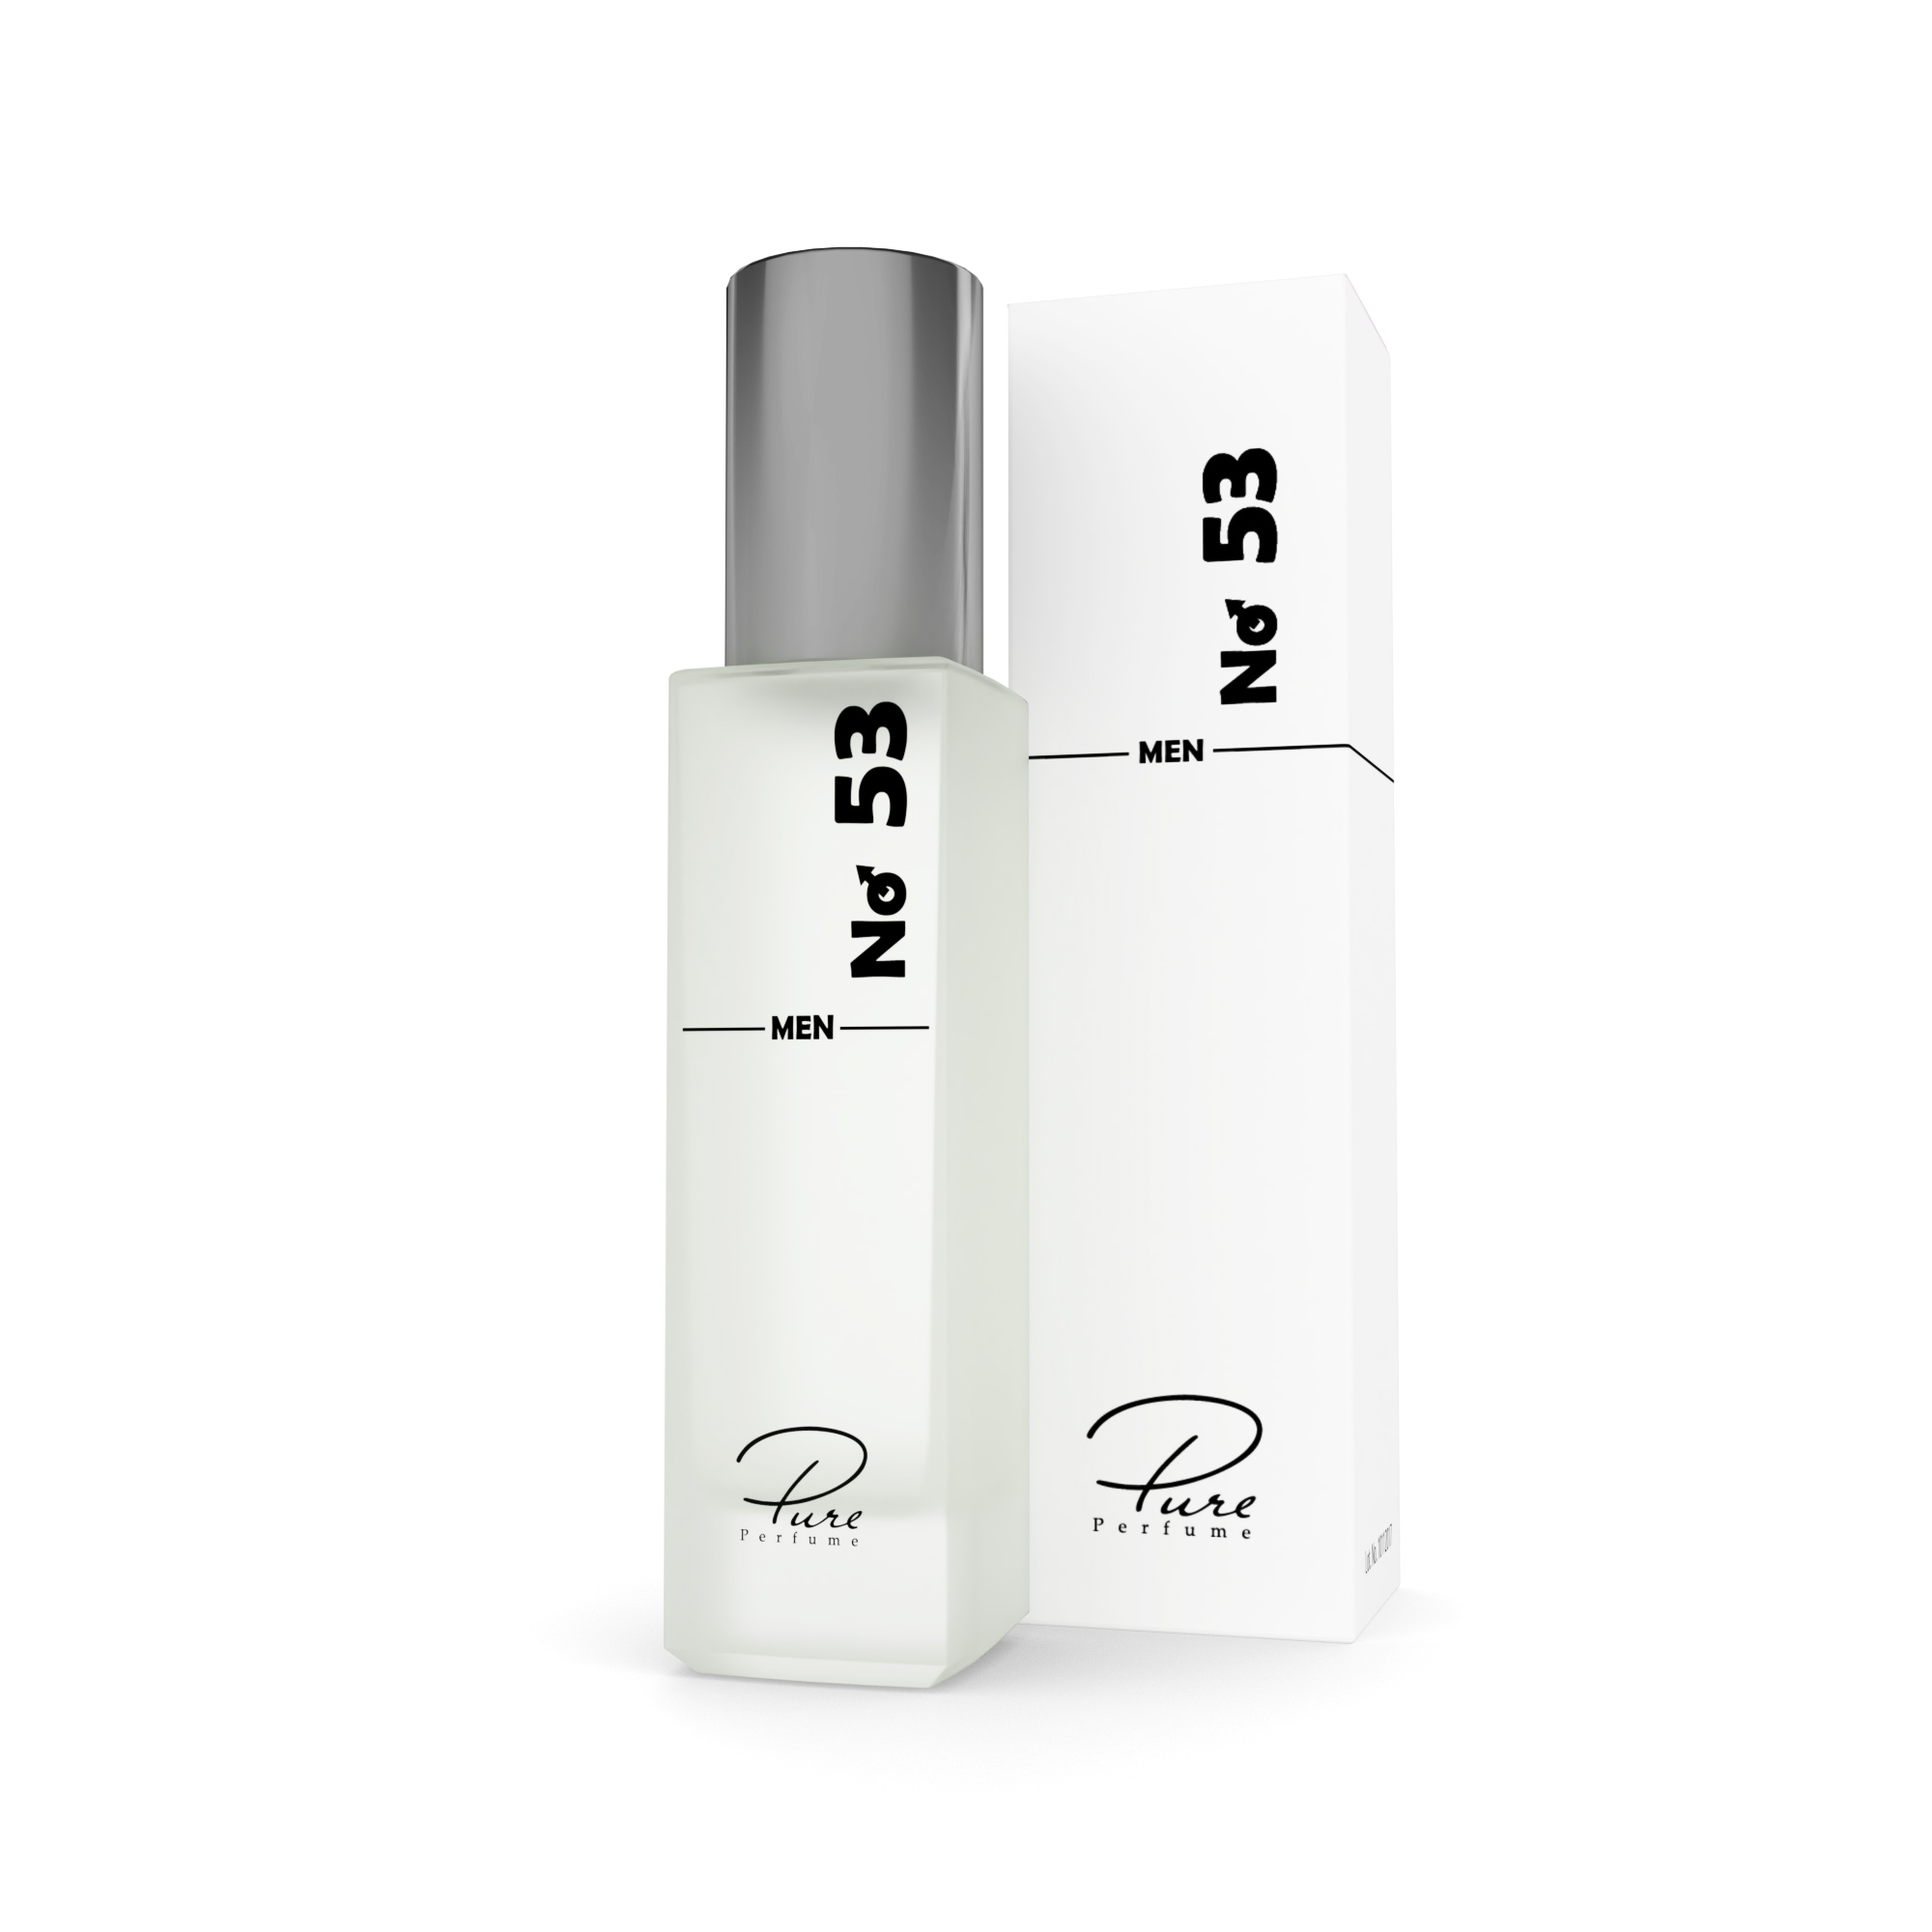 Parfum no 53 - woody and spicy perfume for men 15 ml